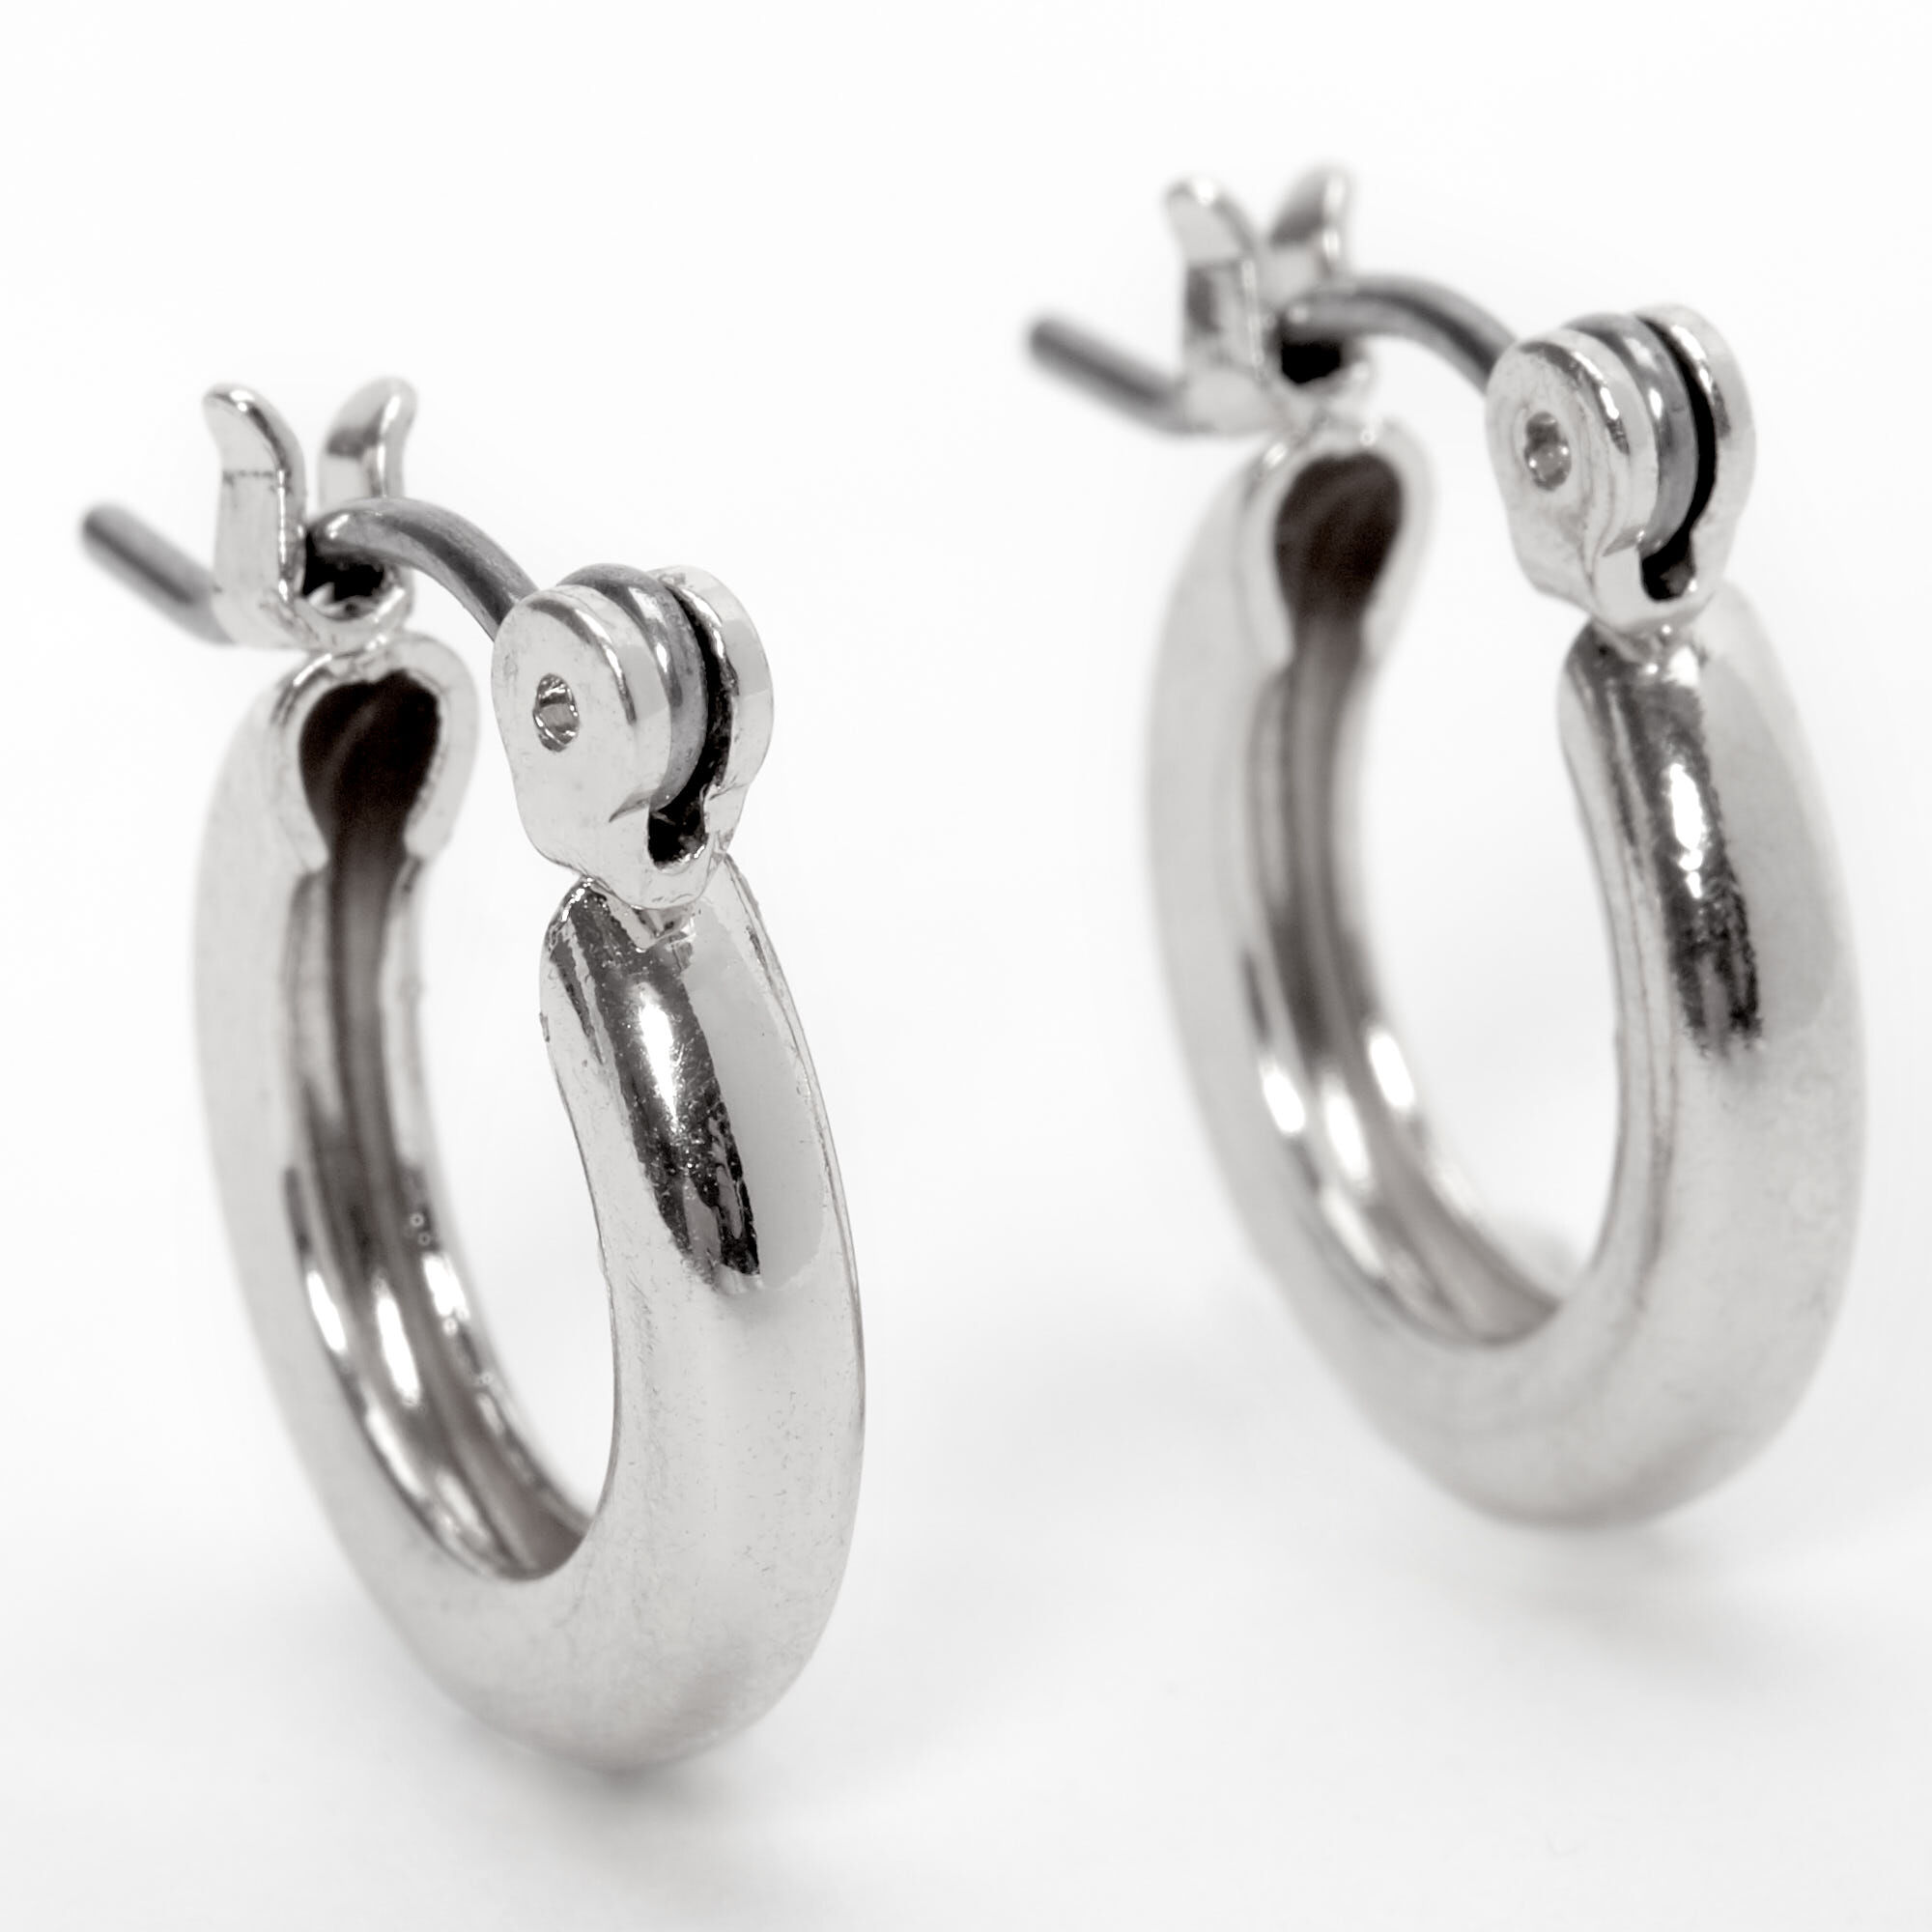 View Claires 10MM Tube Hoop Earrings Silver information